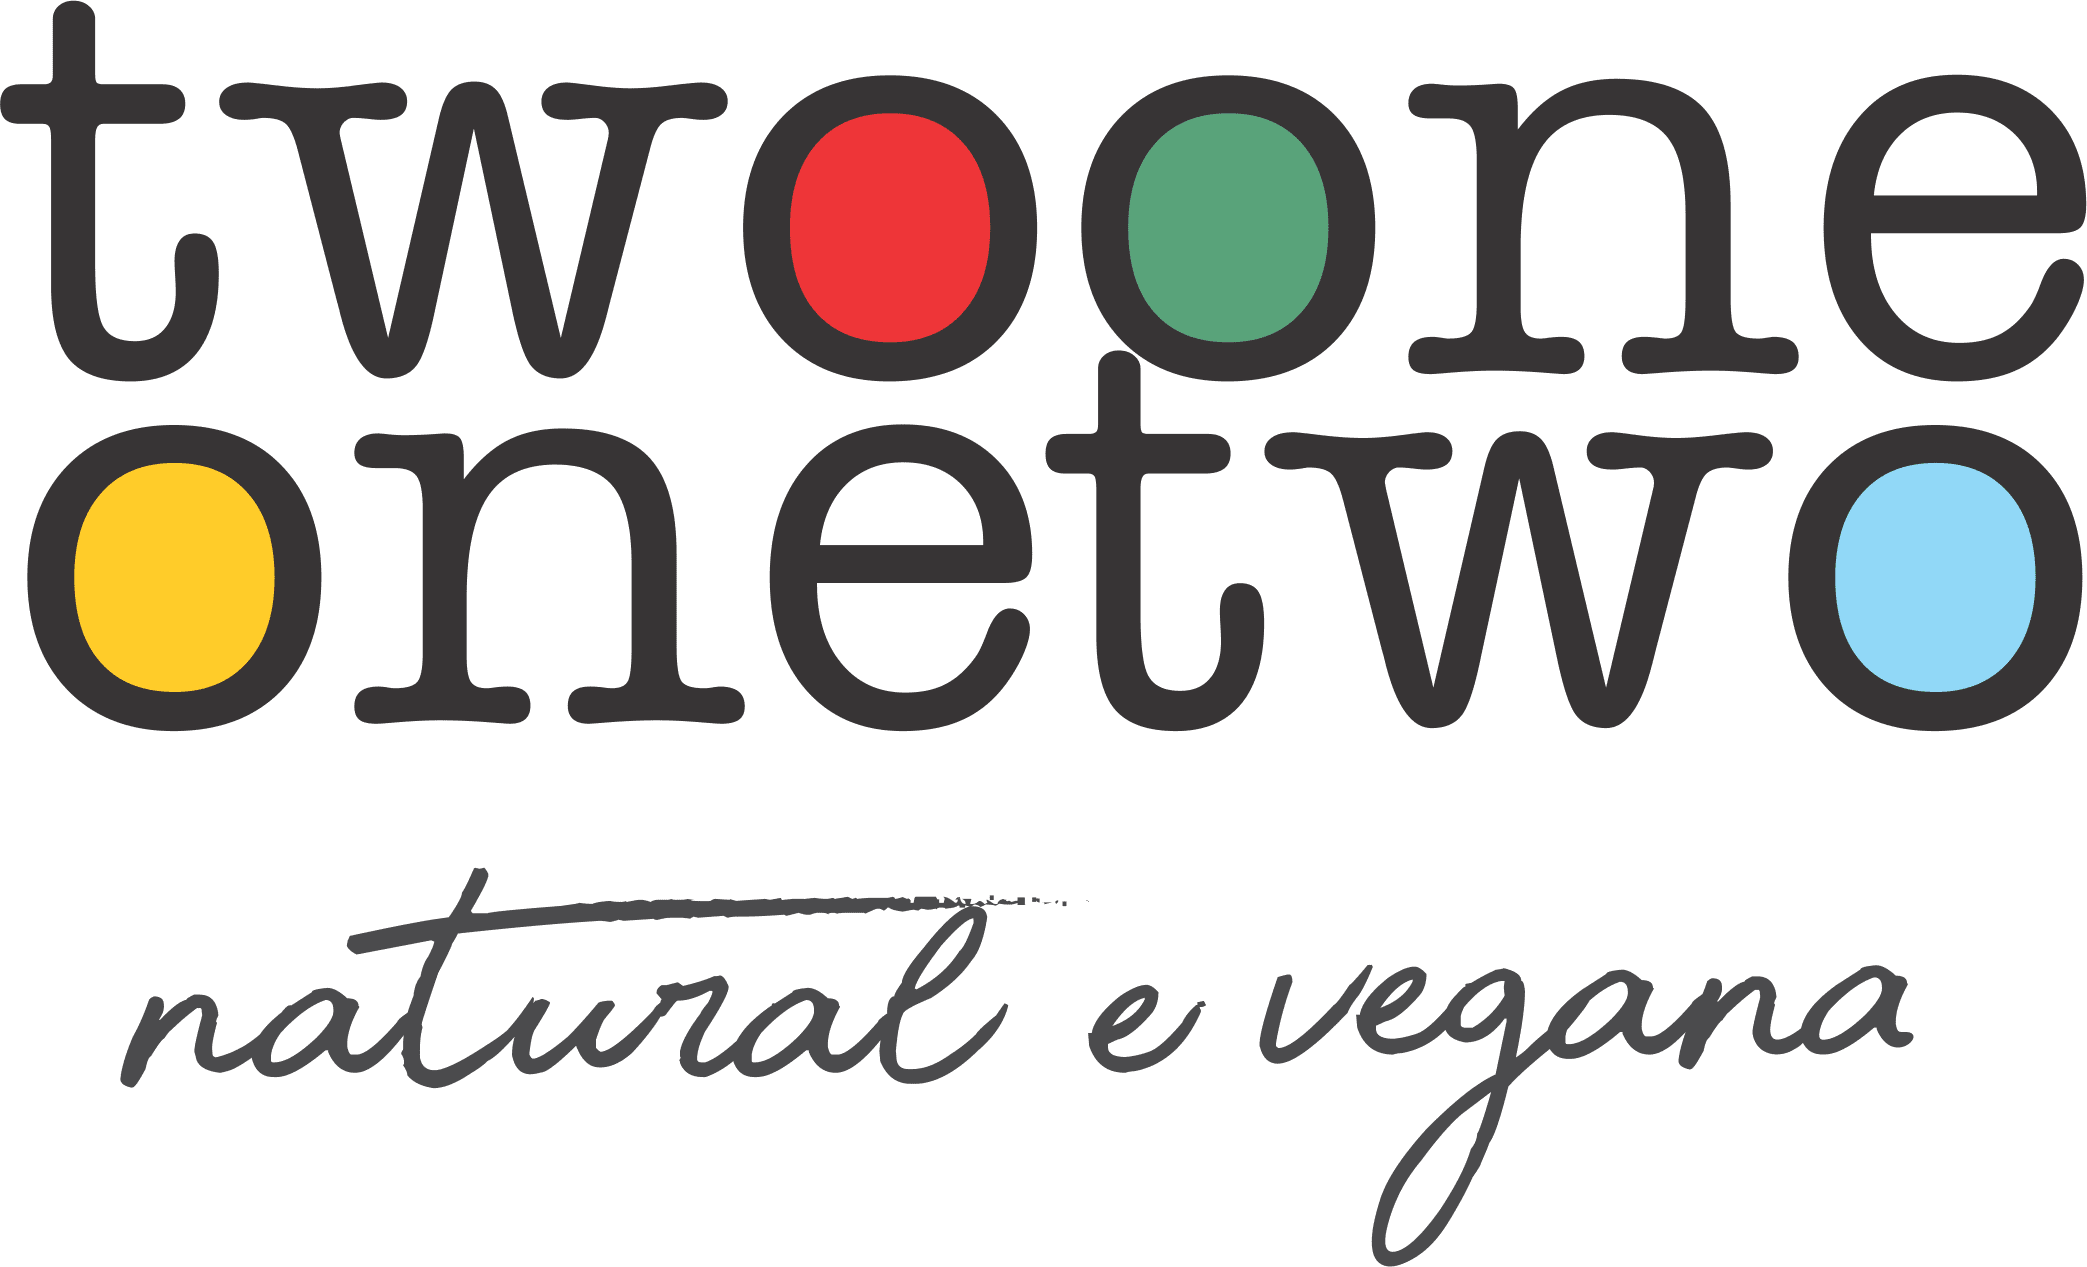 logotipo-twoone-onetwo-natural-vegana-1